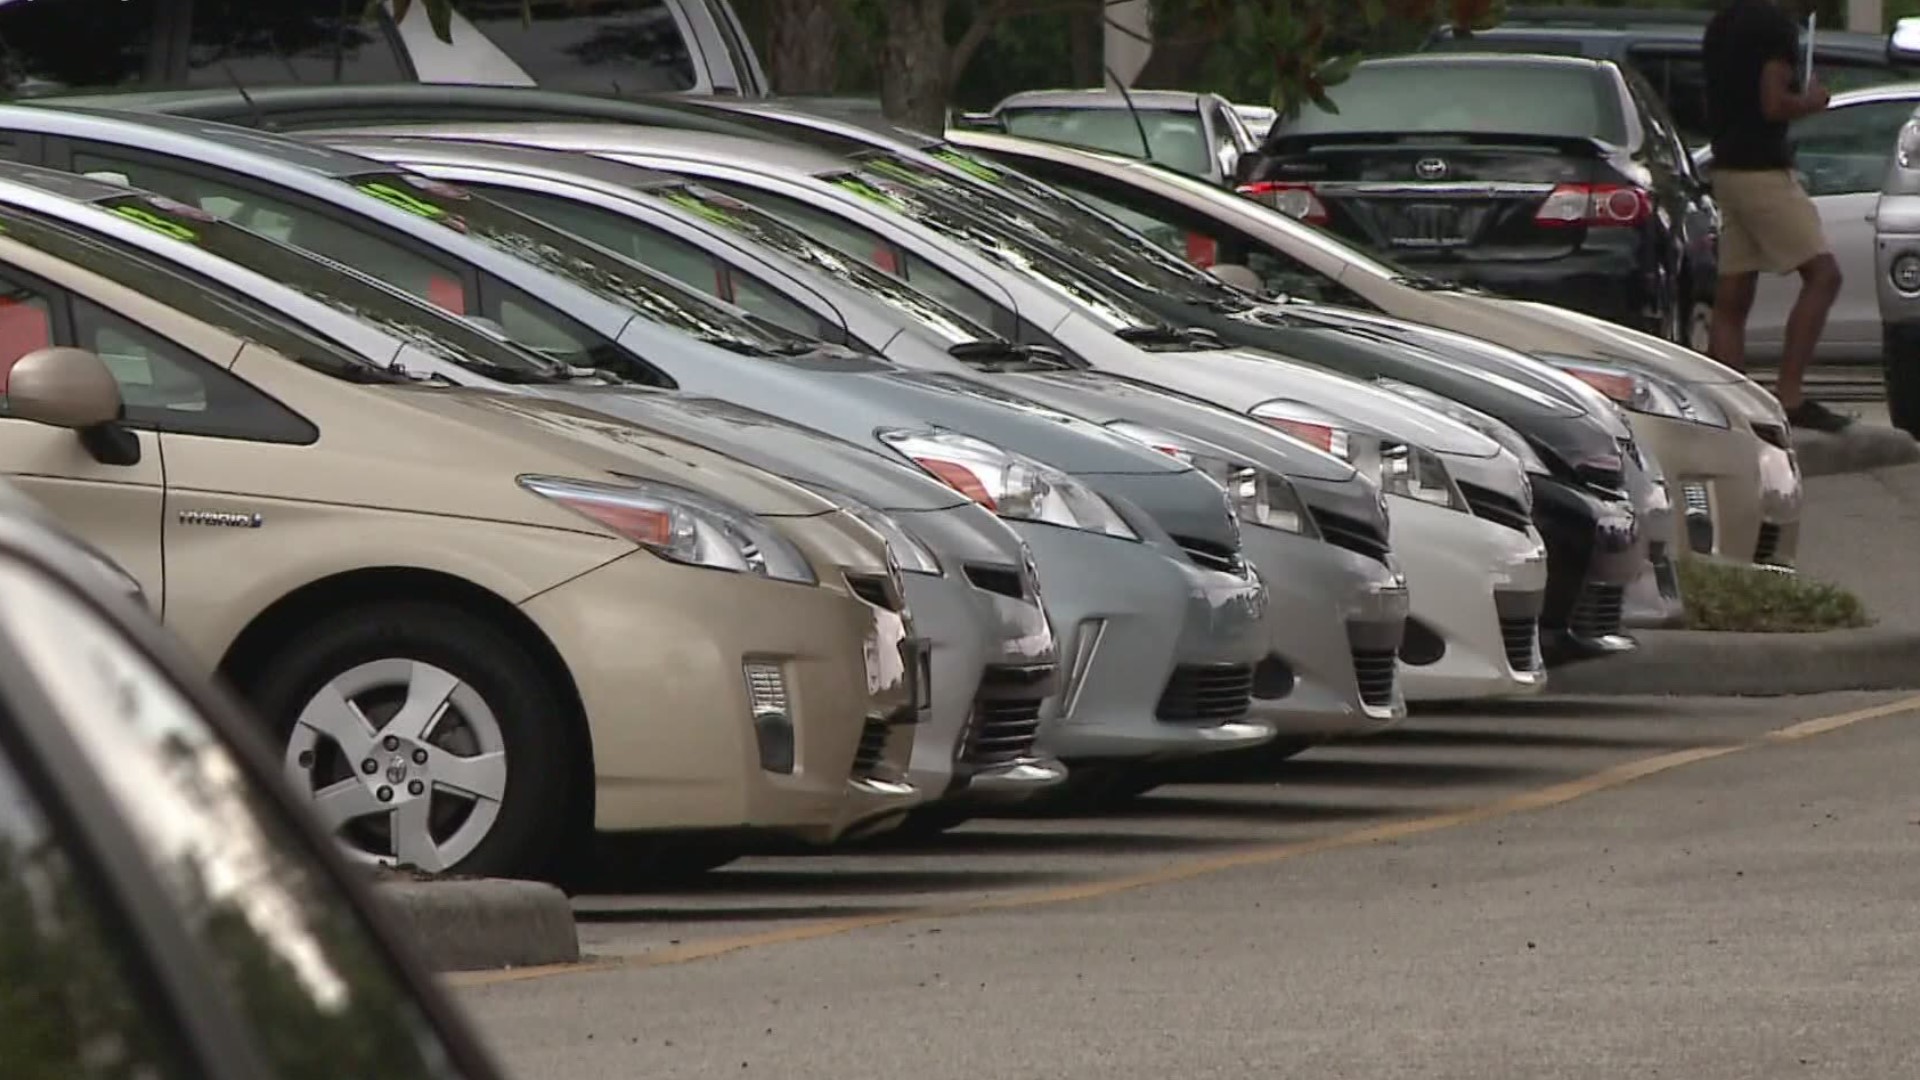 An auto shortage is causing skyrocketing prices on new and used cars, meaning you could make a lot of money if you're in the market to sell.